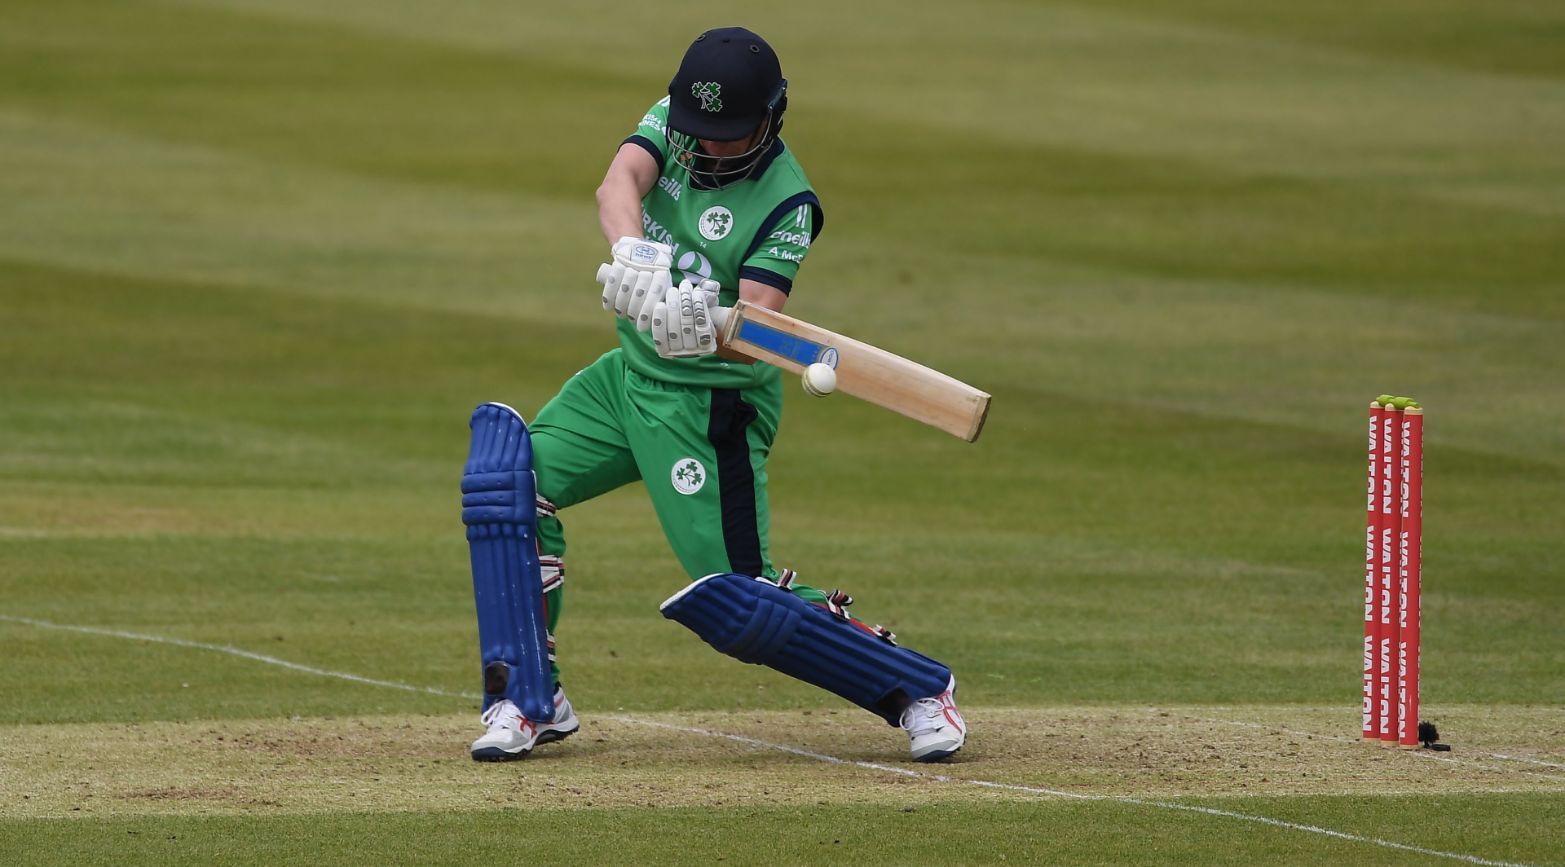 Ireland announce 15 member T20I and ODI squad for South Africa series